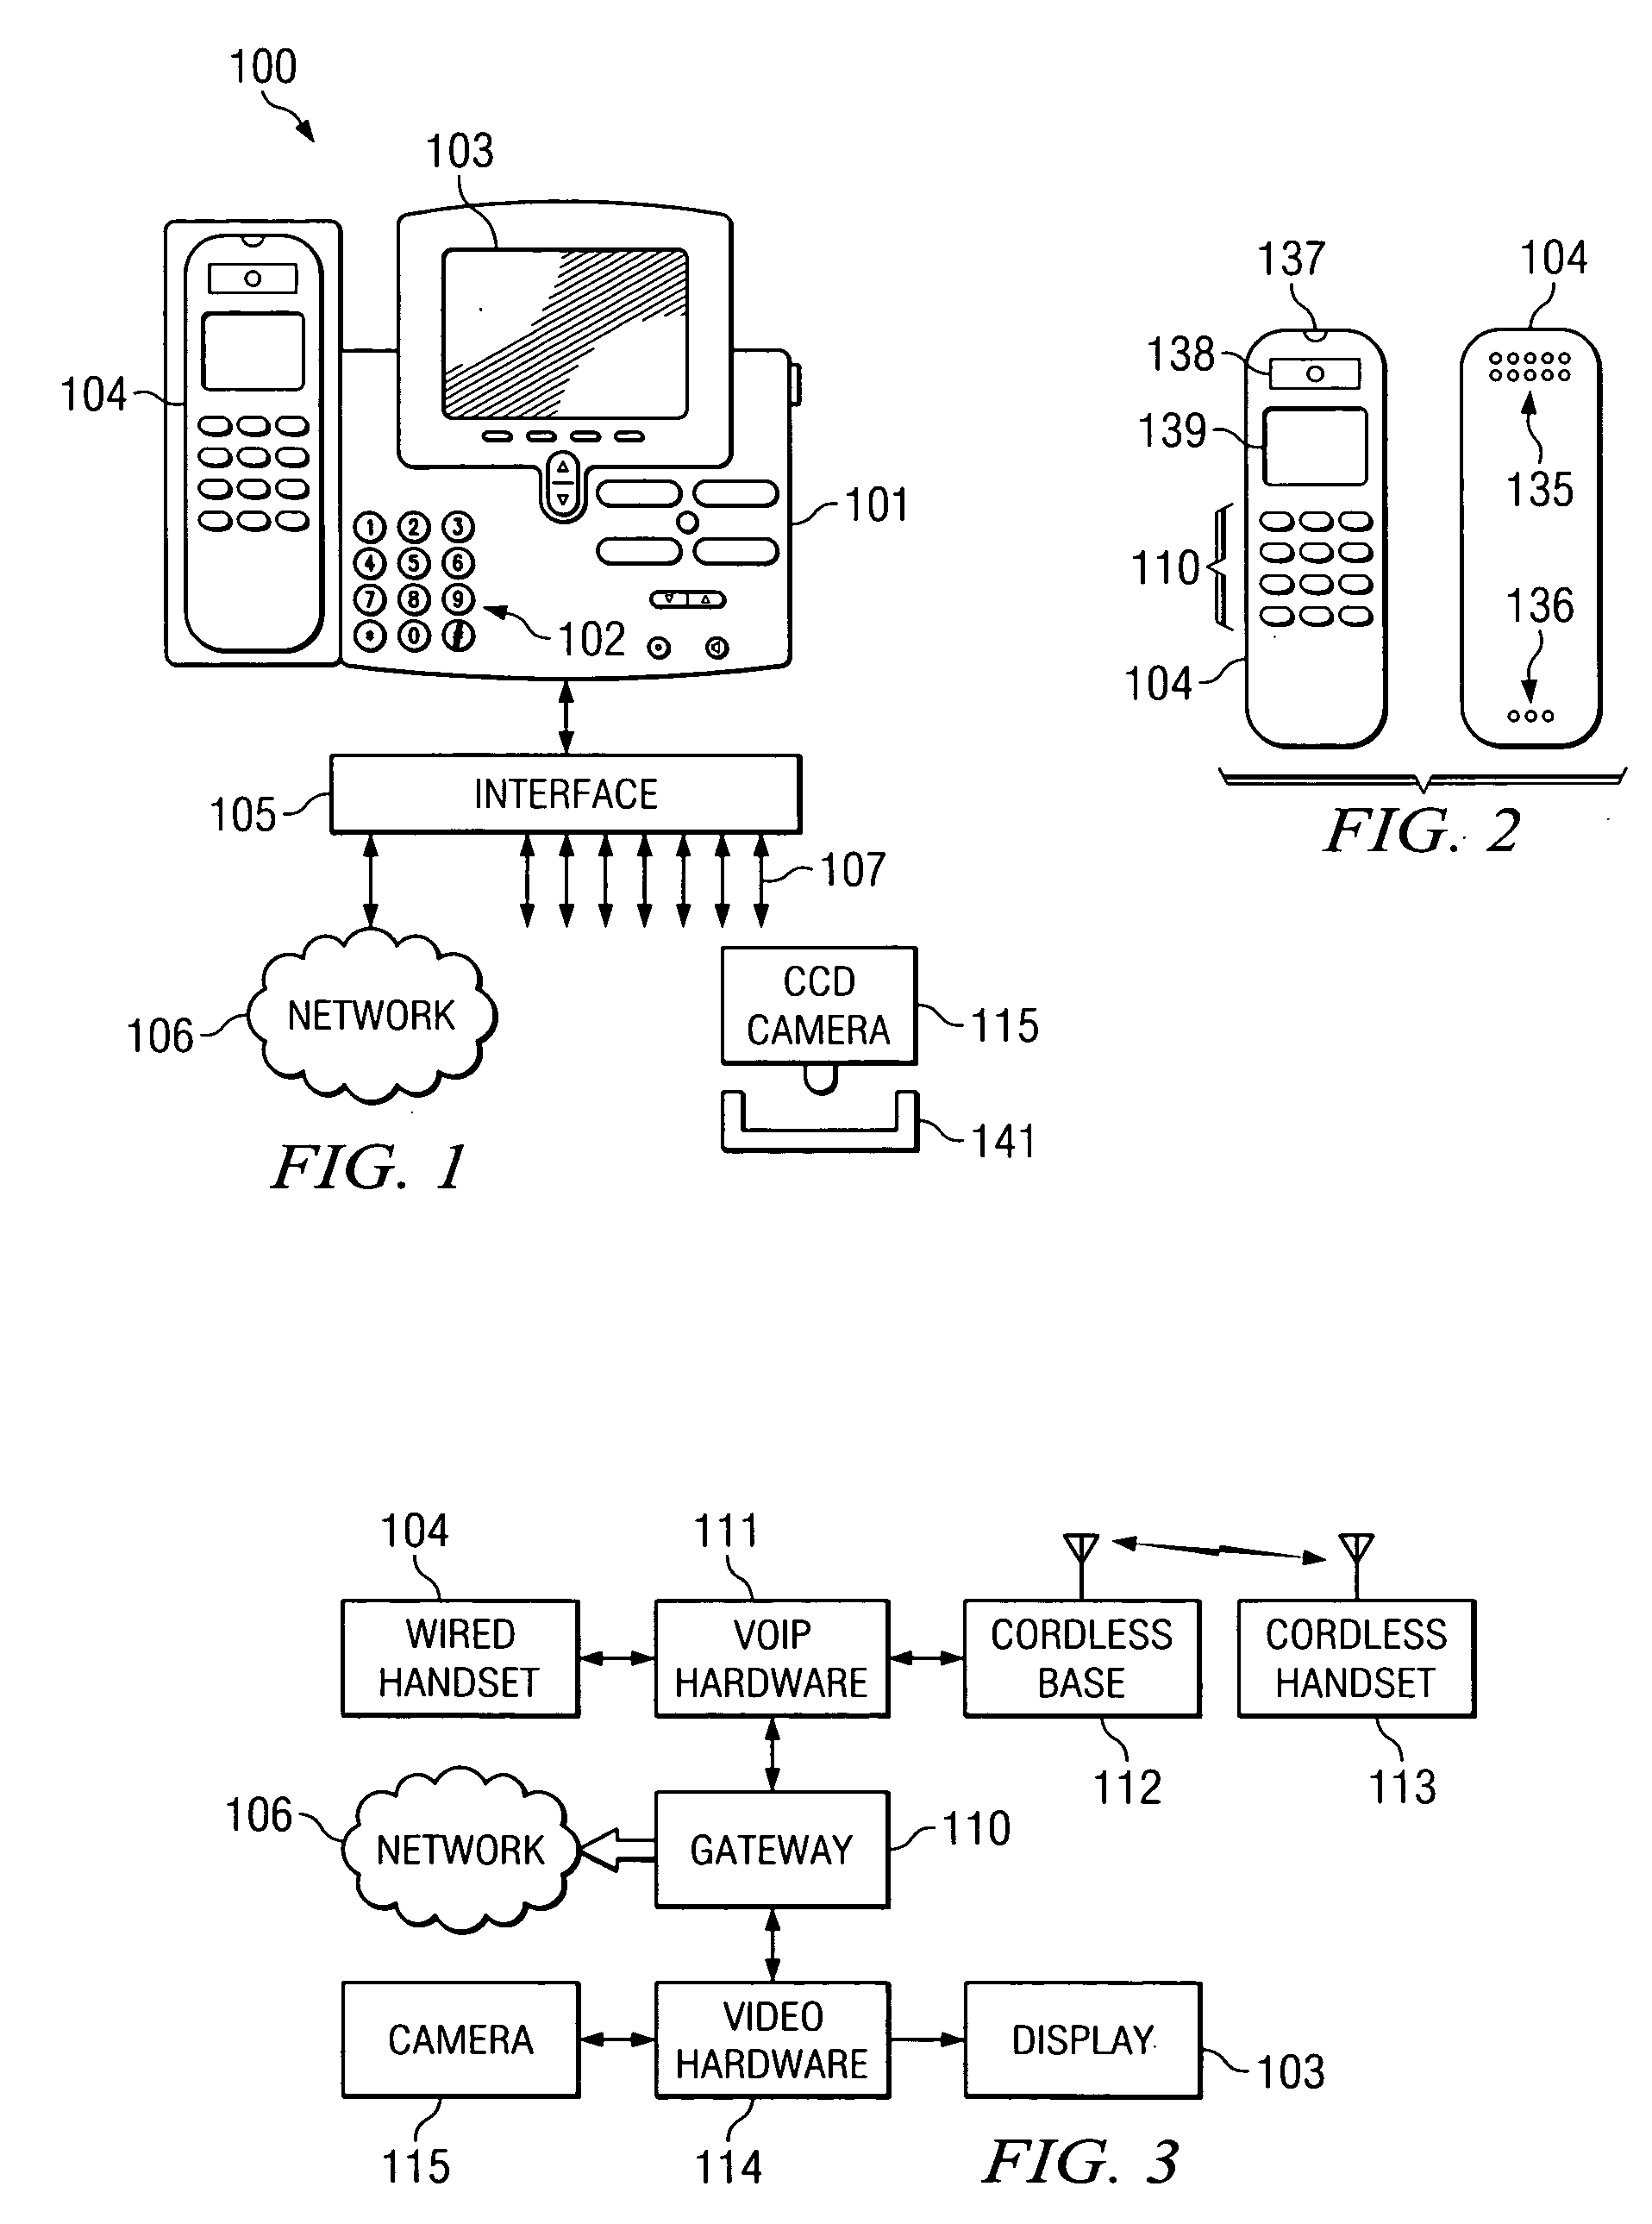 System and method for providing content via IP video telephone network